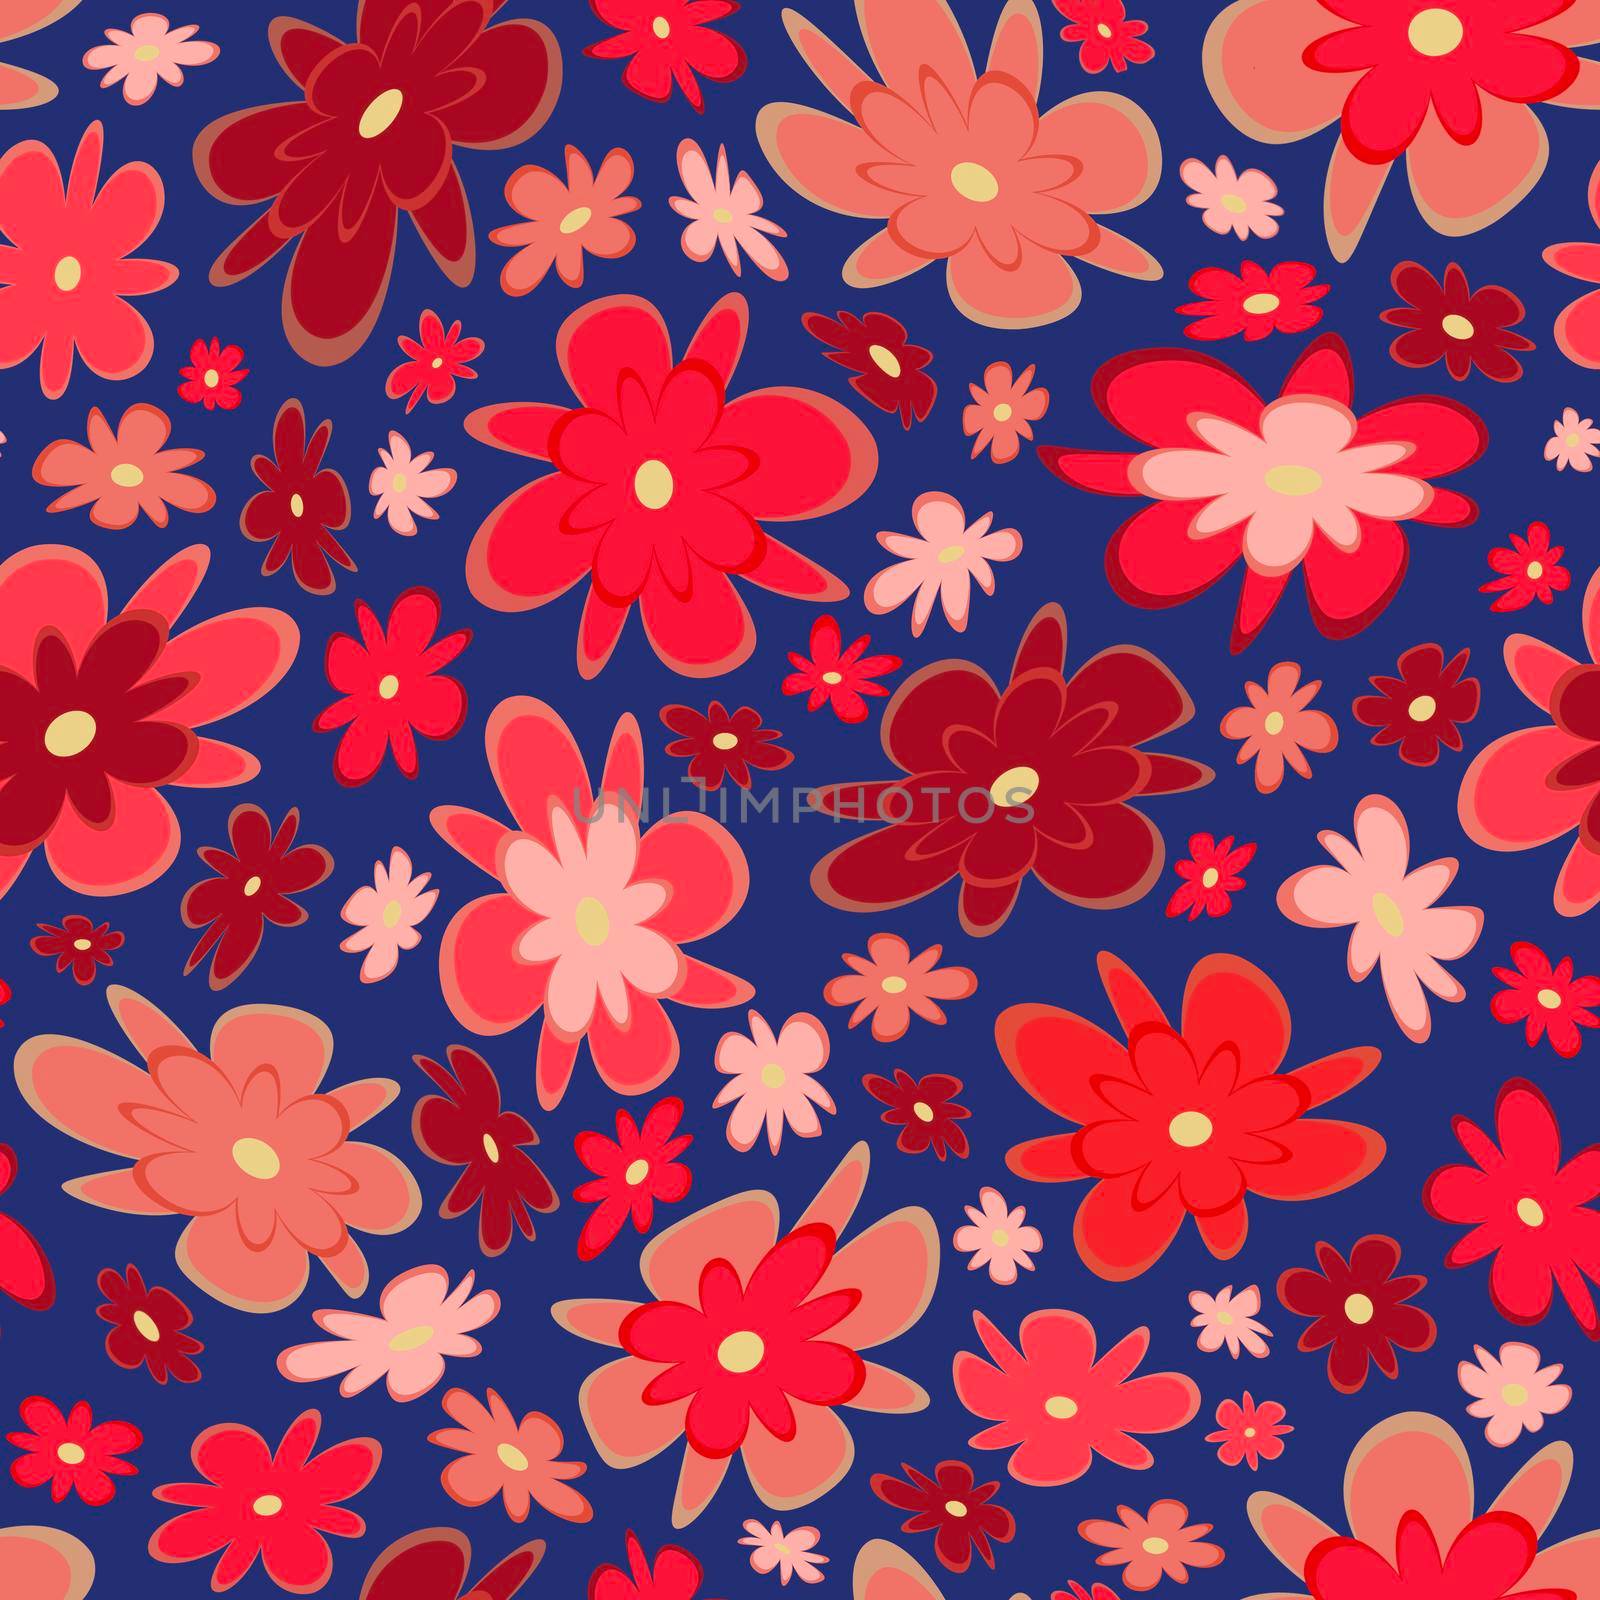 Trendy fabric pattern with miniature flowers.Summer print.Fashion design.Motifs scattered random.Elegant template for fashion prints.Good for fashion,textile,fabric,gift wrapping paper.Coral on blue.